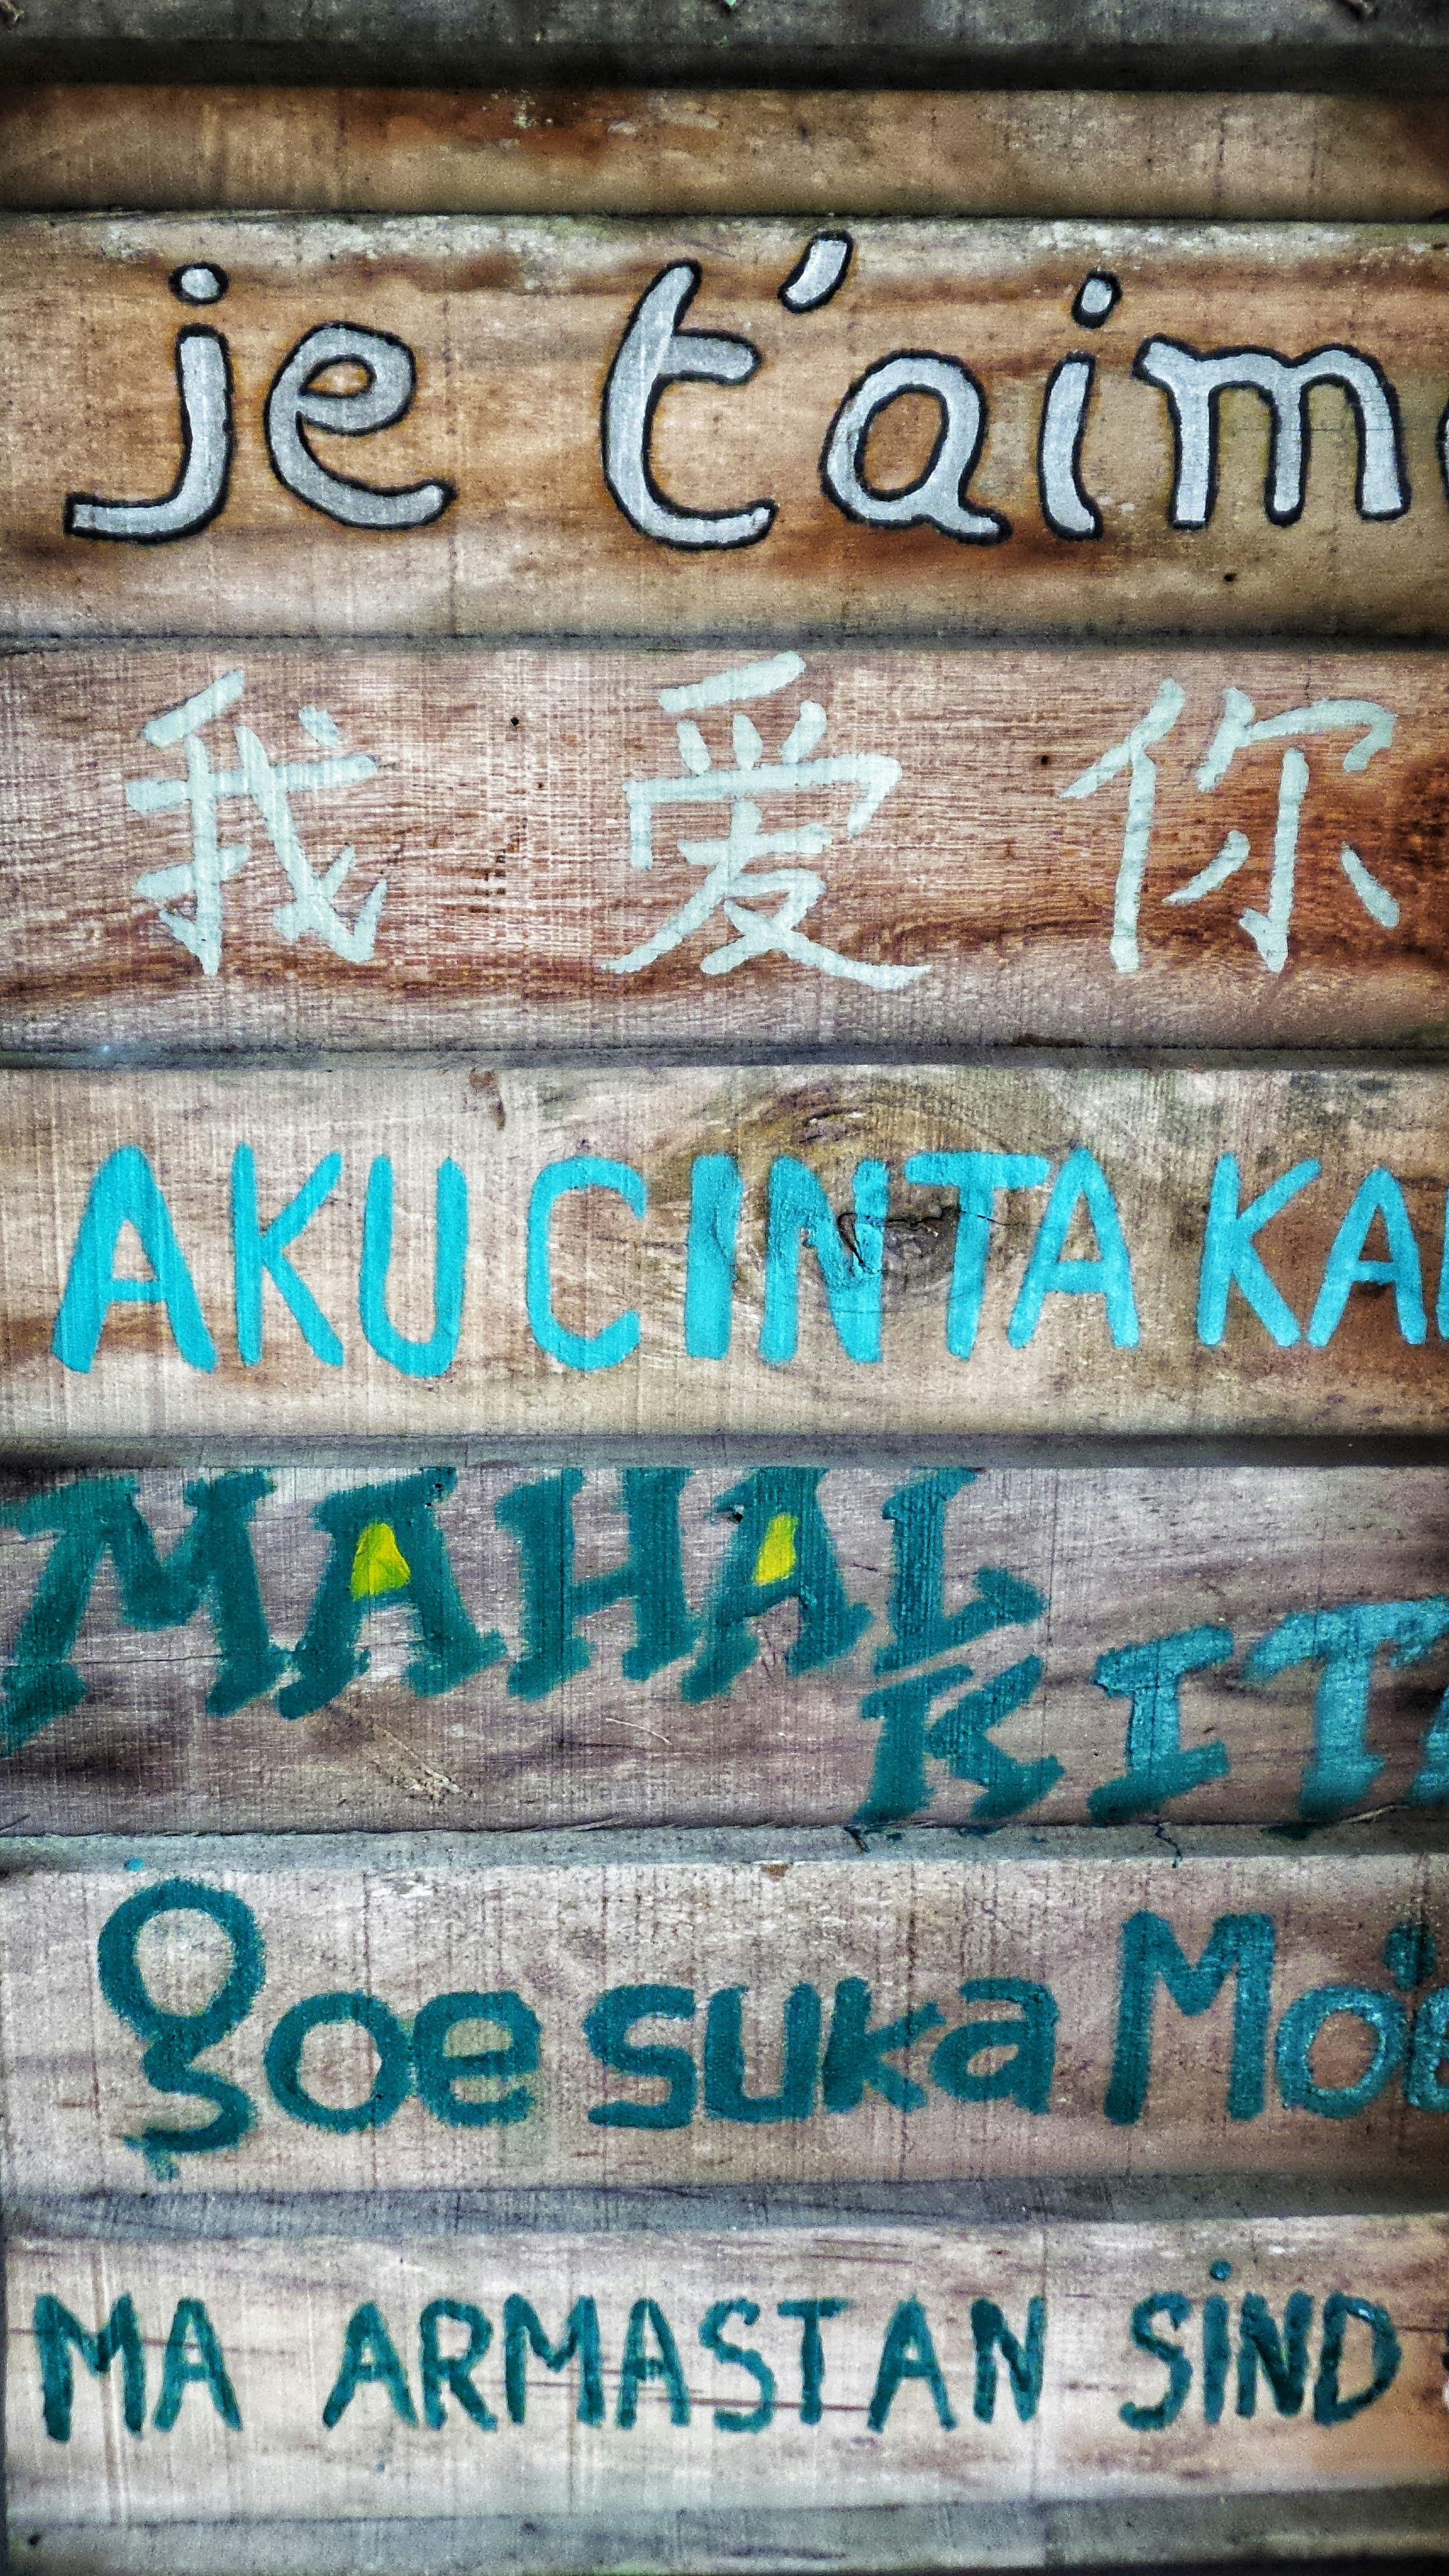 I love you painted in various language from around the world on wood